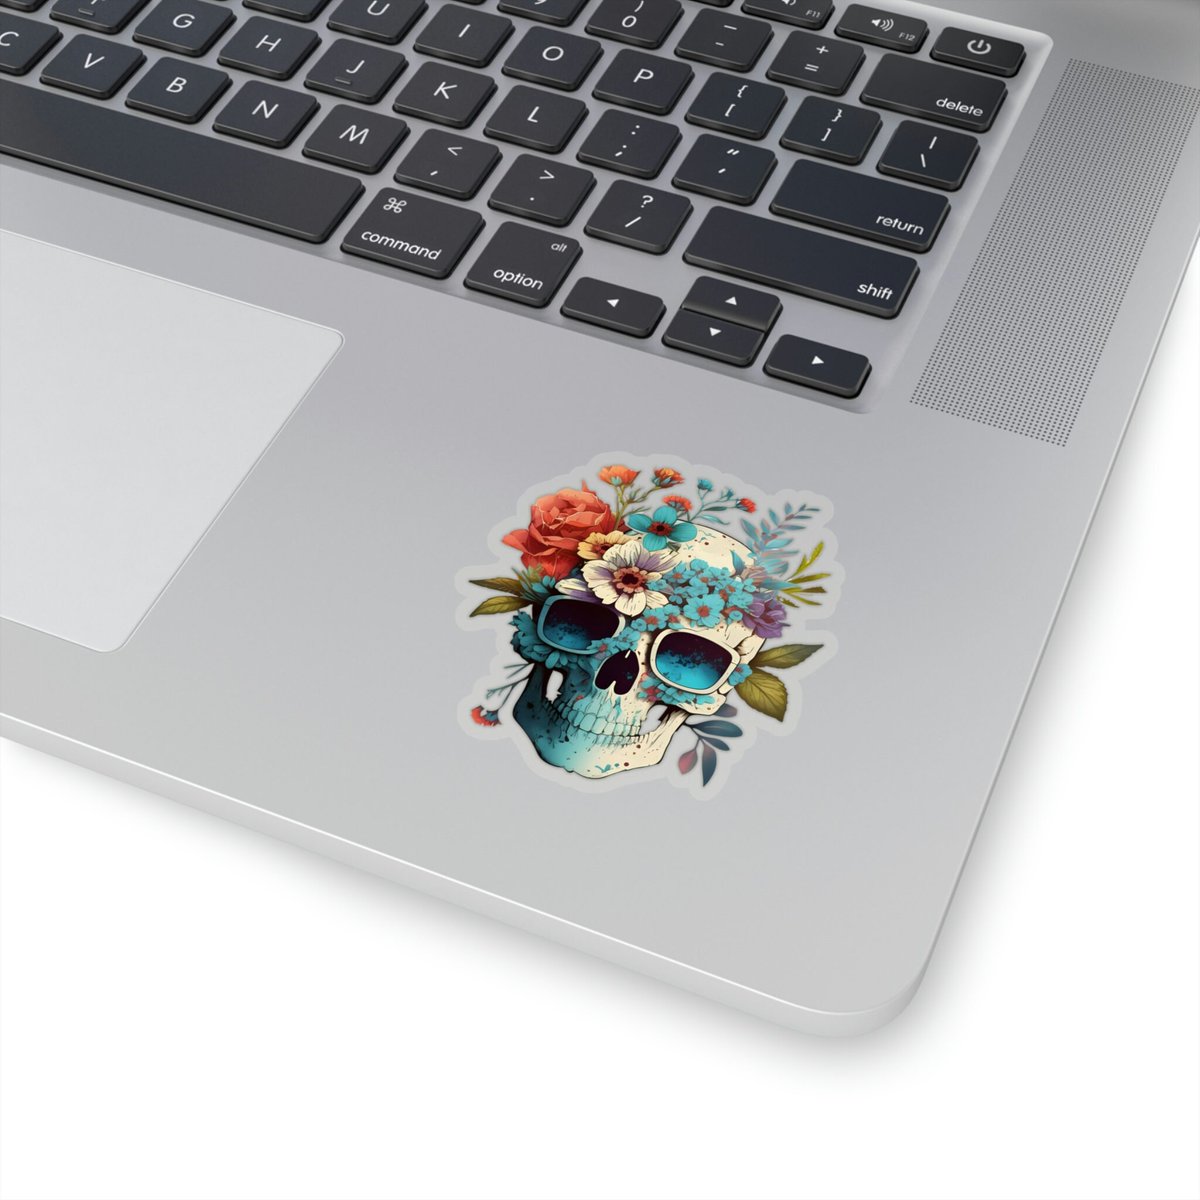 Add some personality to your belongings with our trendy skull wearing sunglasses and flowers kiss cut sticker! Perfect for laptops, water bottles, and more. Get yours today and stand out from the crowd! #skullsticker #MHHSBD #SBS #Sticker